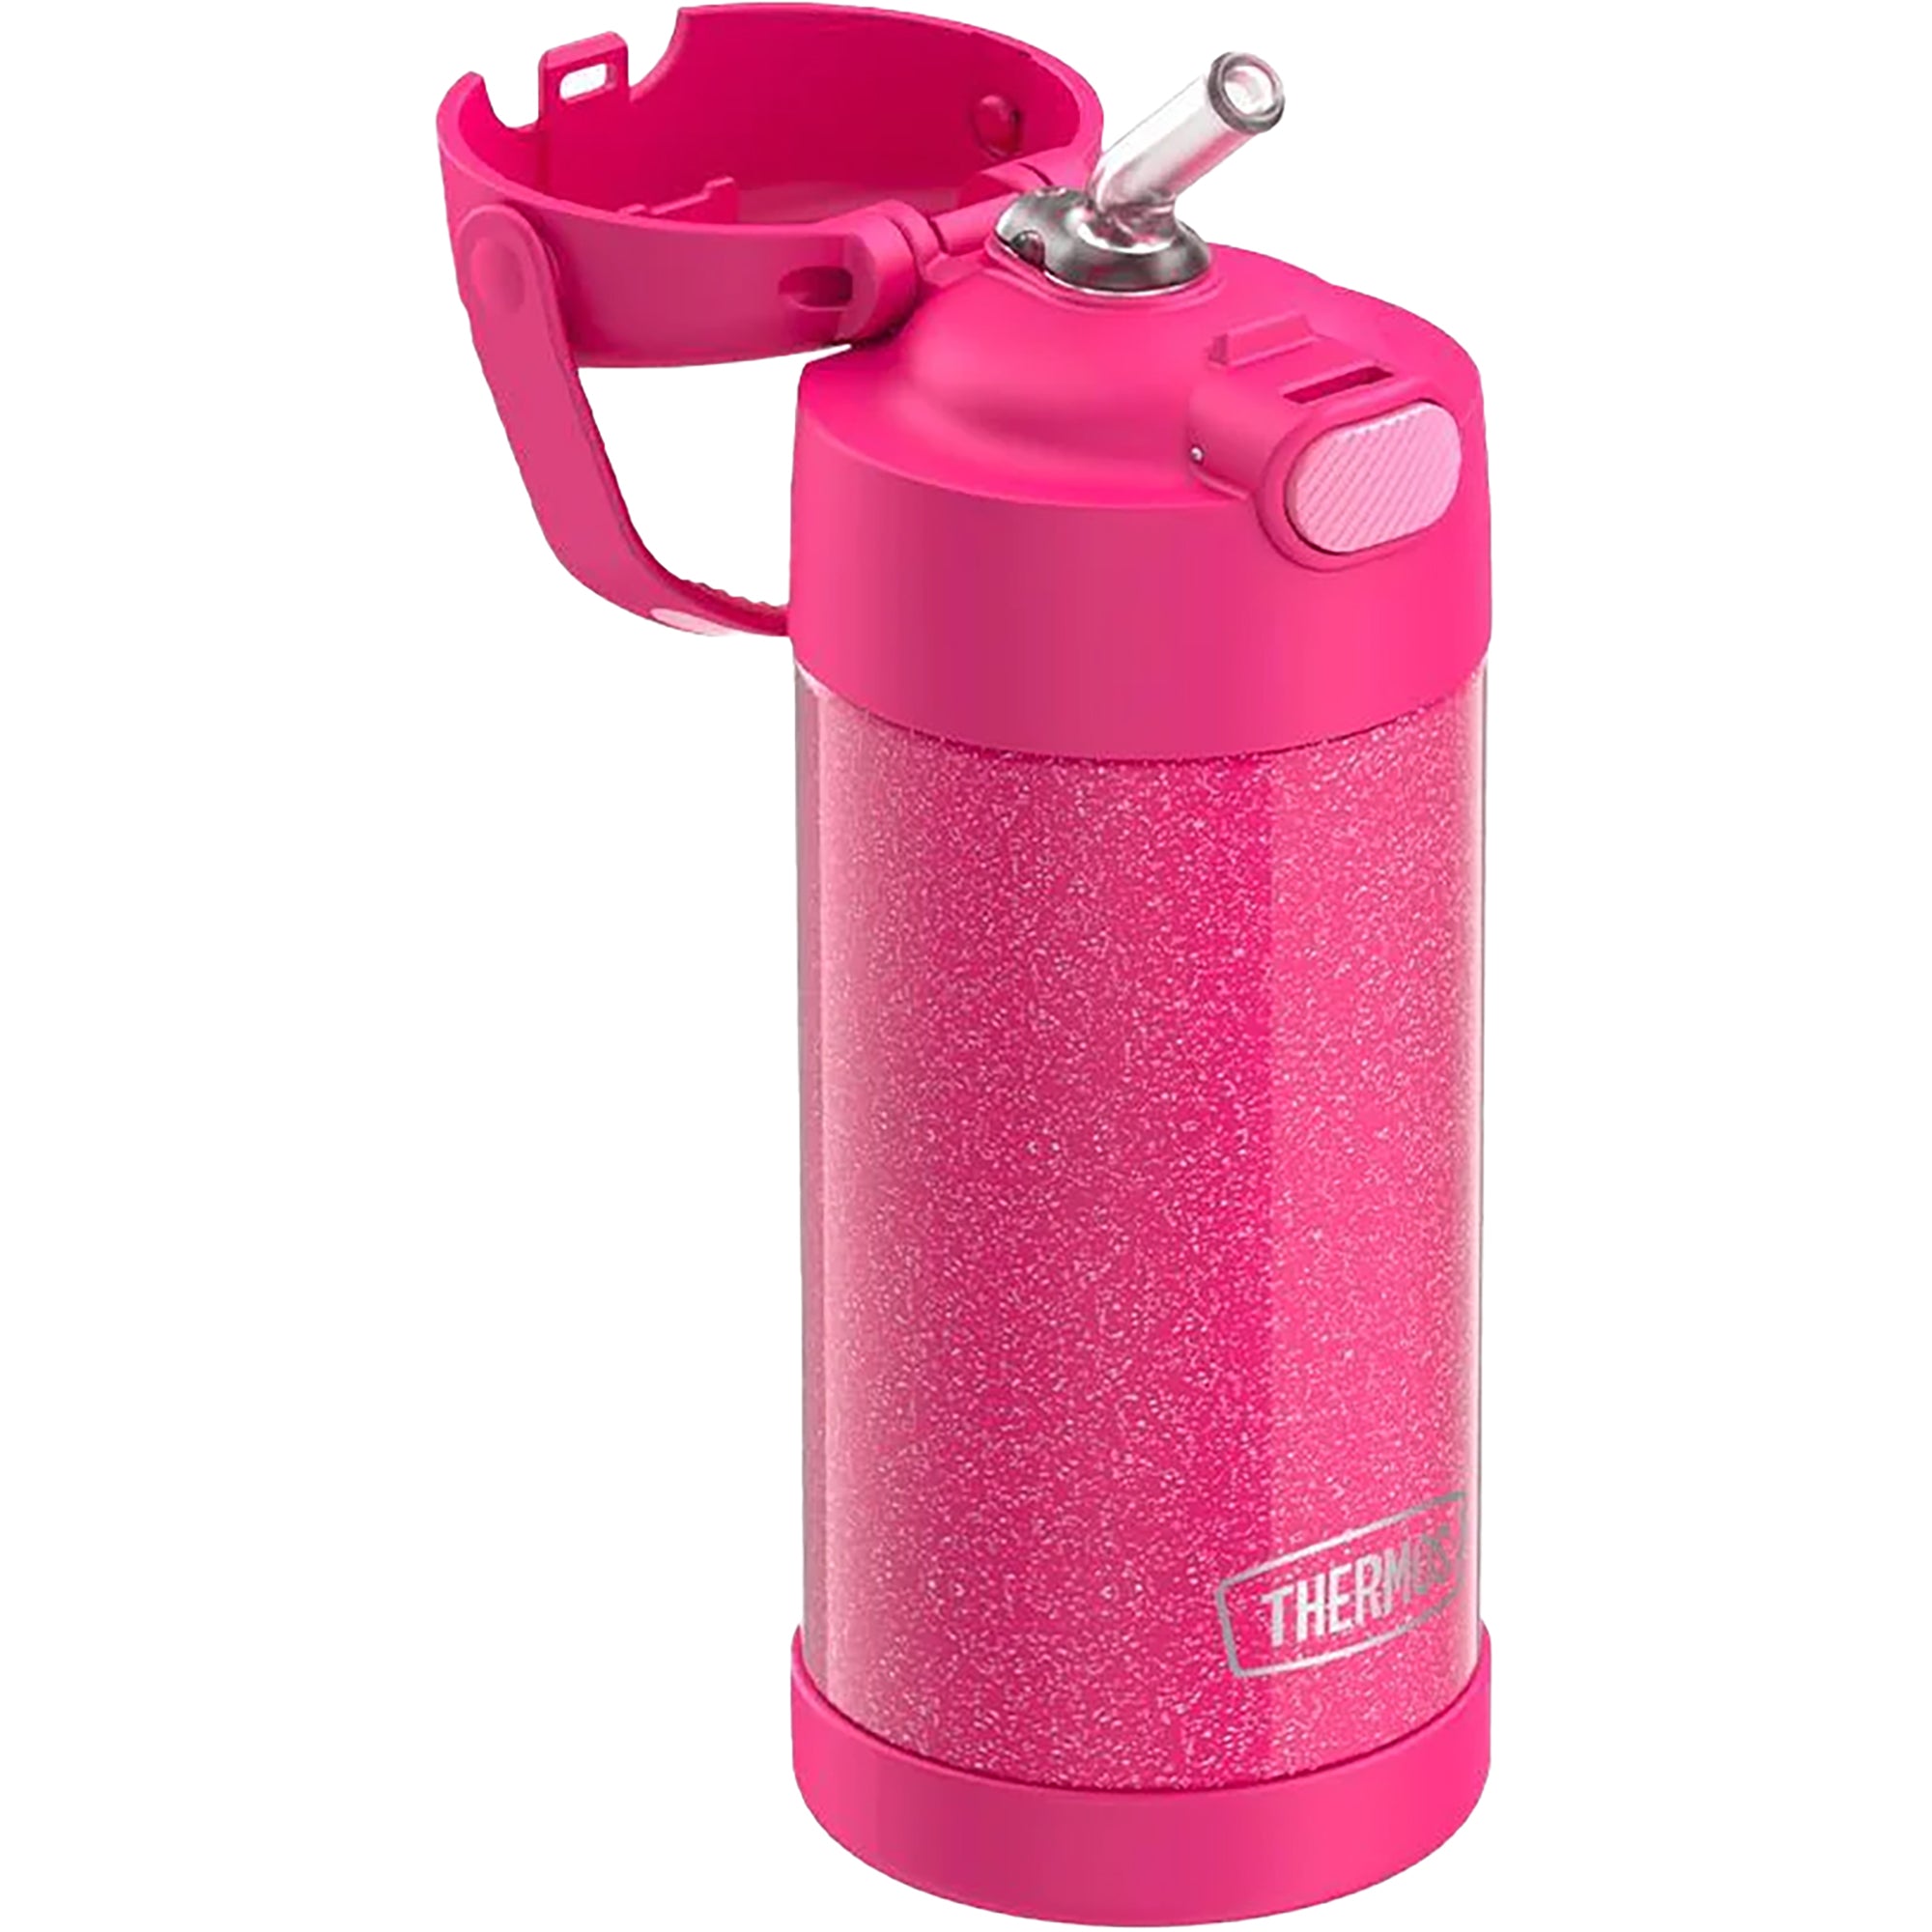 Thermos Kid's 12 oz. Funtainer Stainless Steel Water Bottle - Pink Glitter Thermos